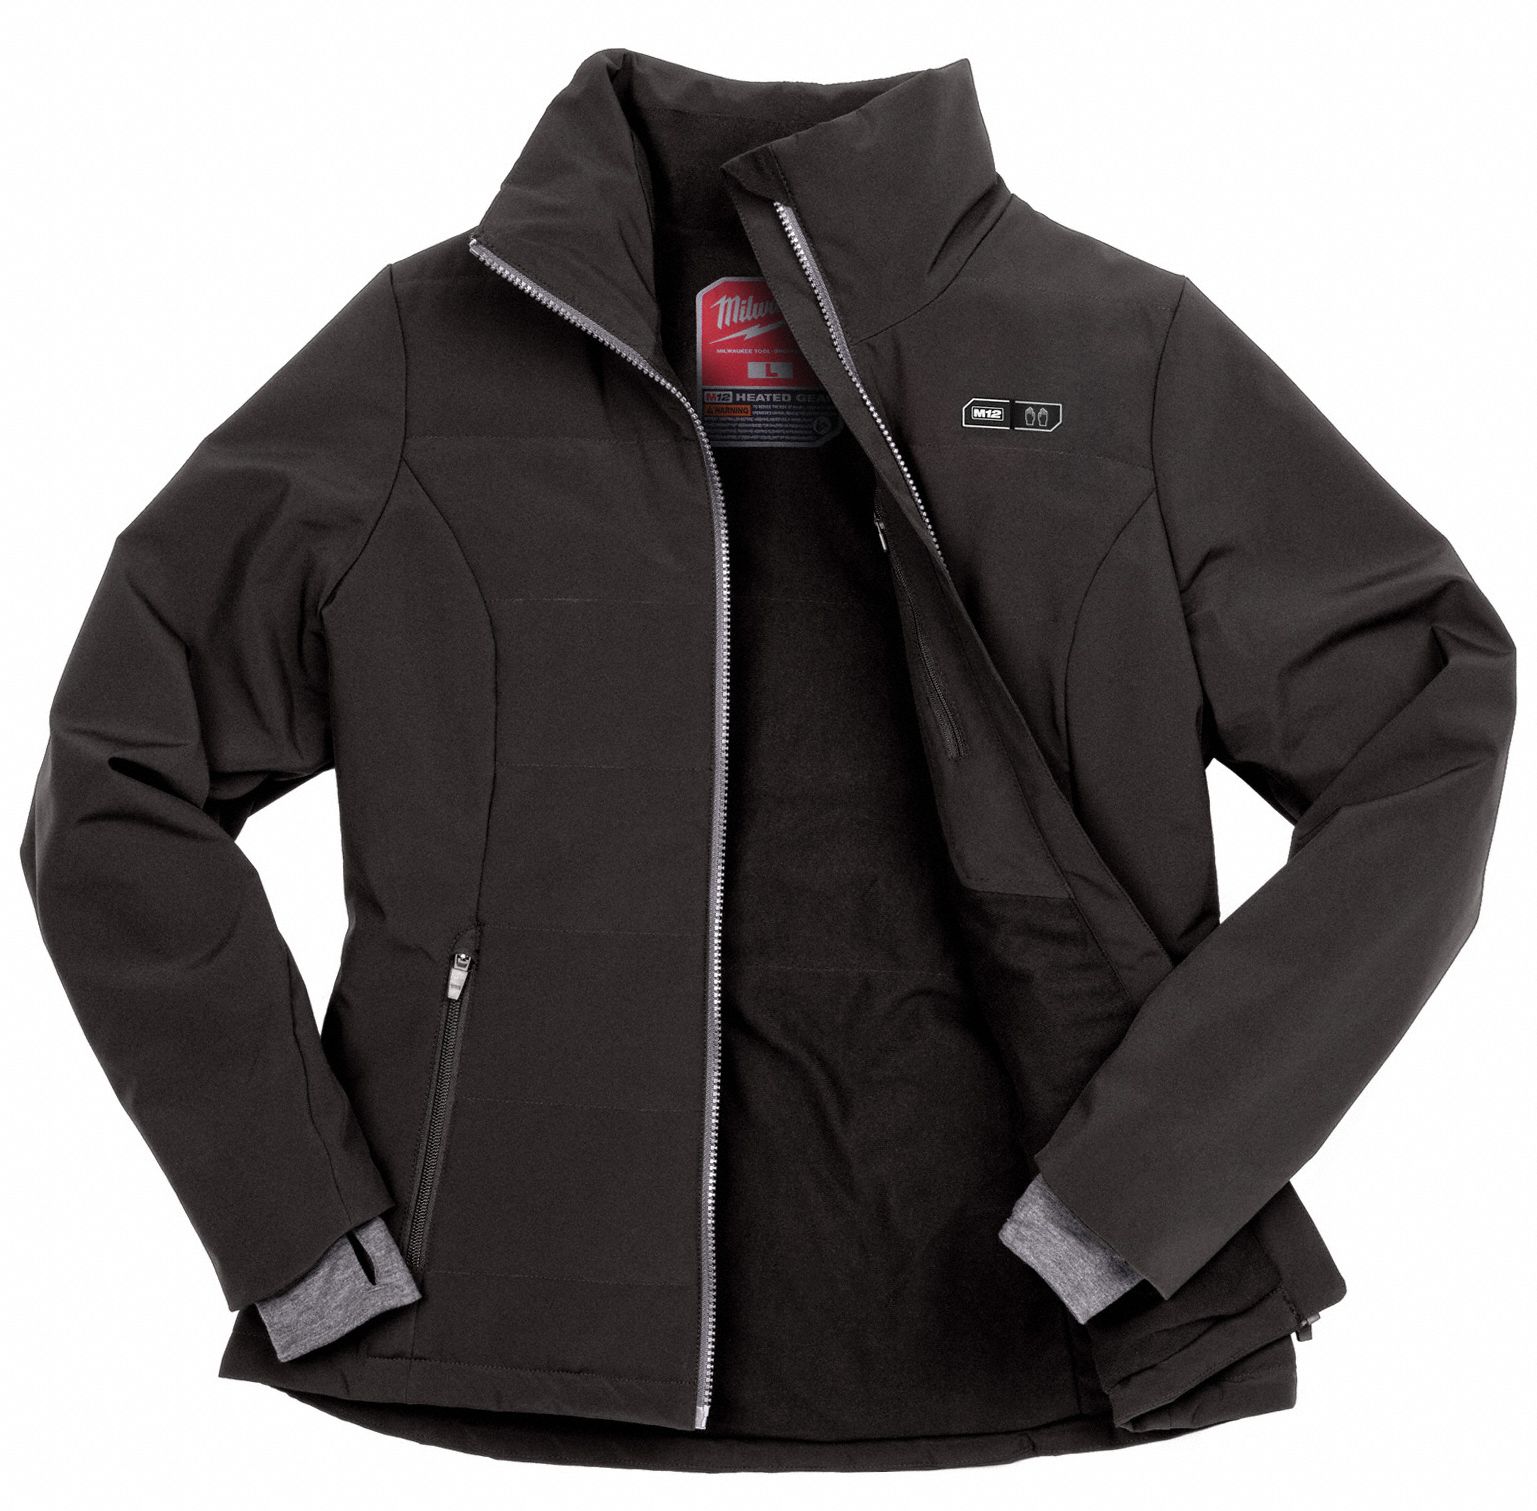 MILWAUKEE Women's Black Heated Jacket, Size L, Battery Included Yes 498X68232B21L Grainger